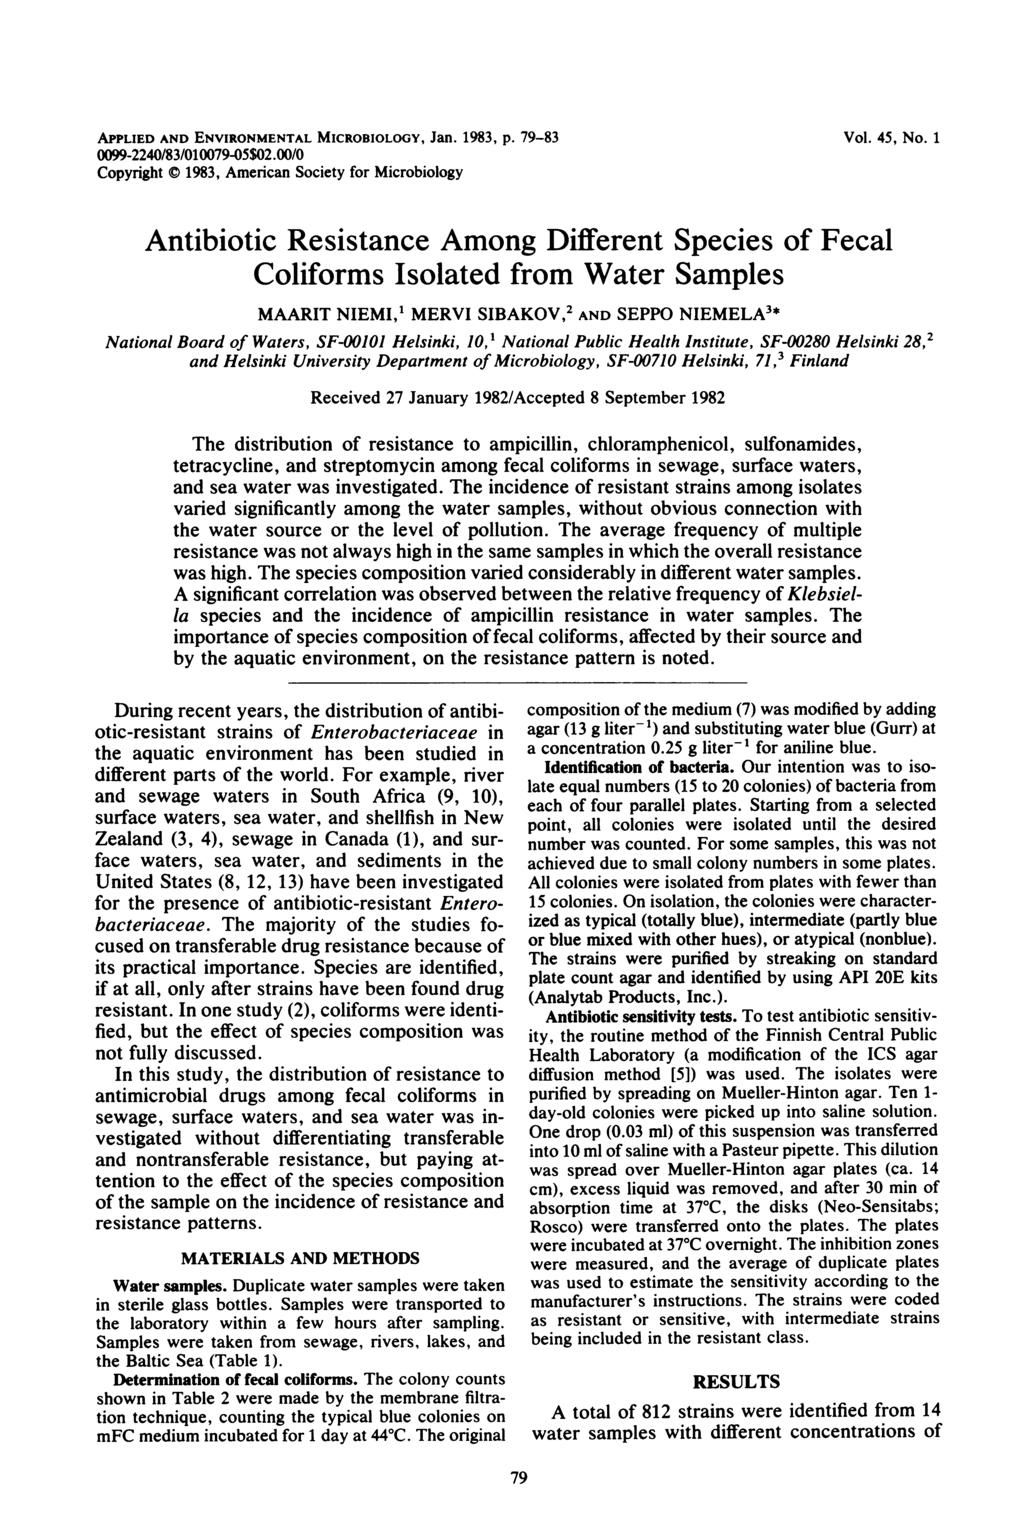 APPLIED AND ENVIRONMENTAL MICROBIOLOGY, Jan. 1983, p. 79-83 0099-2240/83/010079-05$02.00/0 Copyright C 1983, American Society for Microbiology Vol. 45, No.